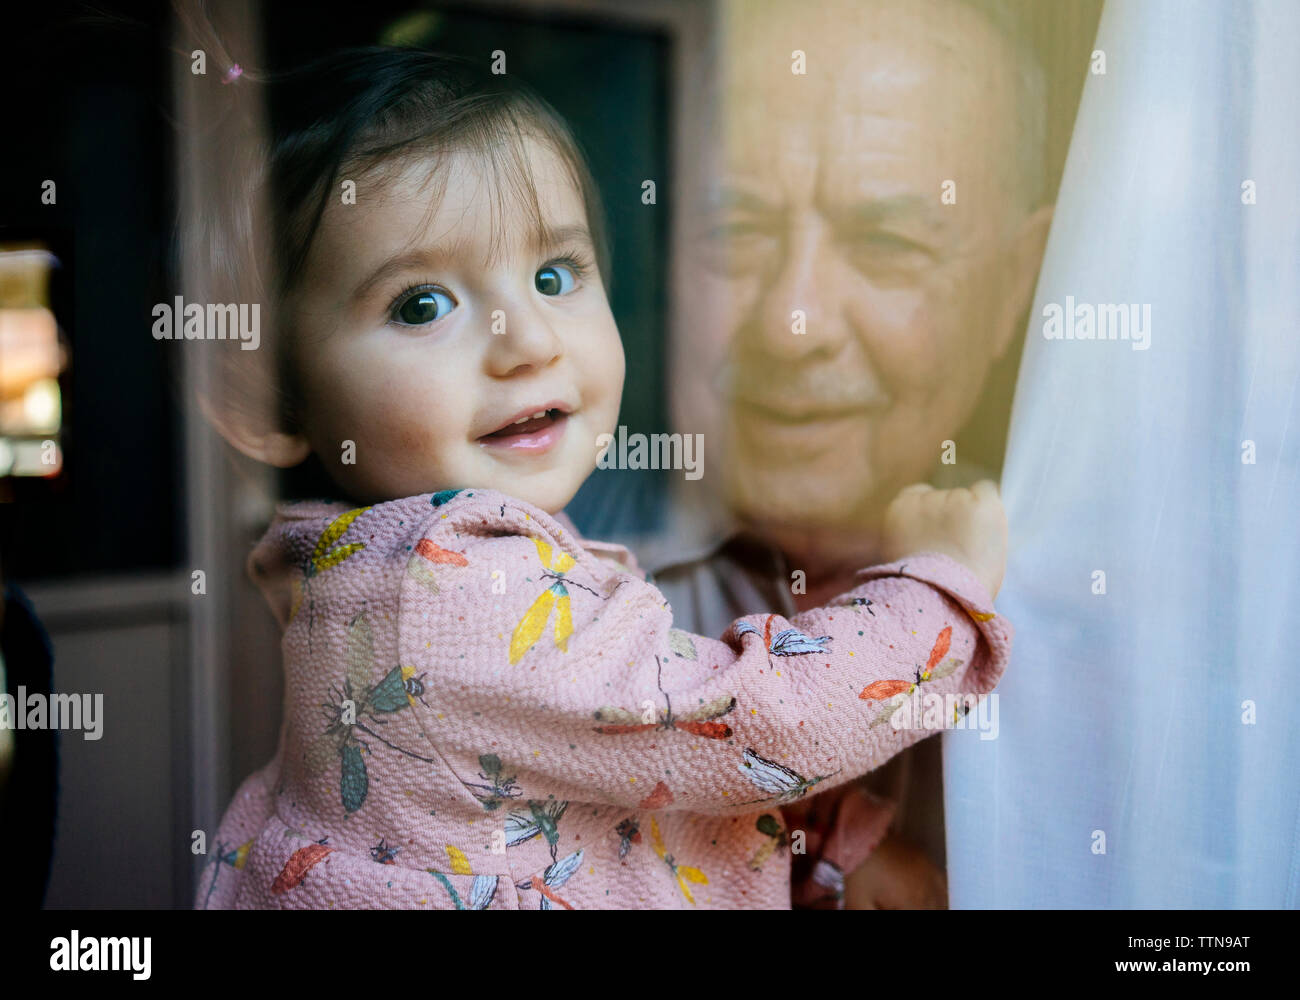 Portrait of cute granddaughter carried by grandfather seen through window Stock Photo